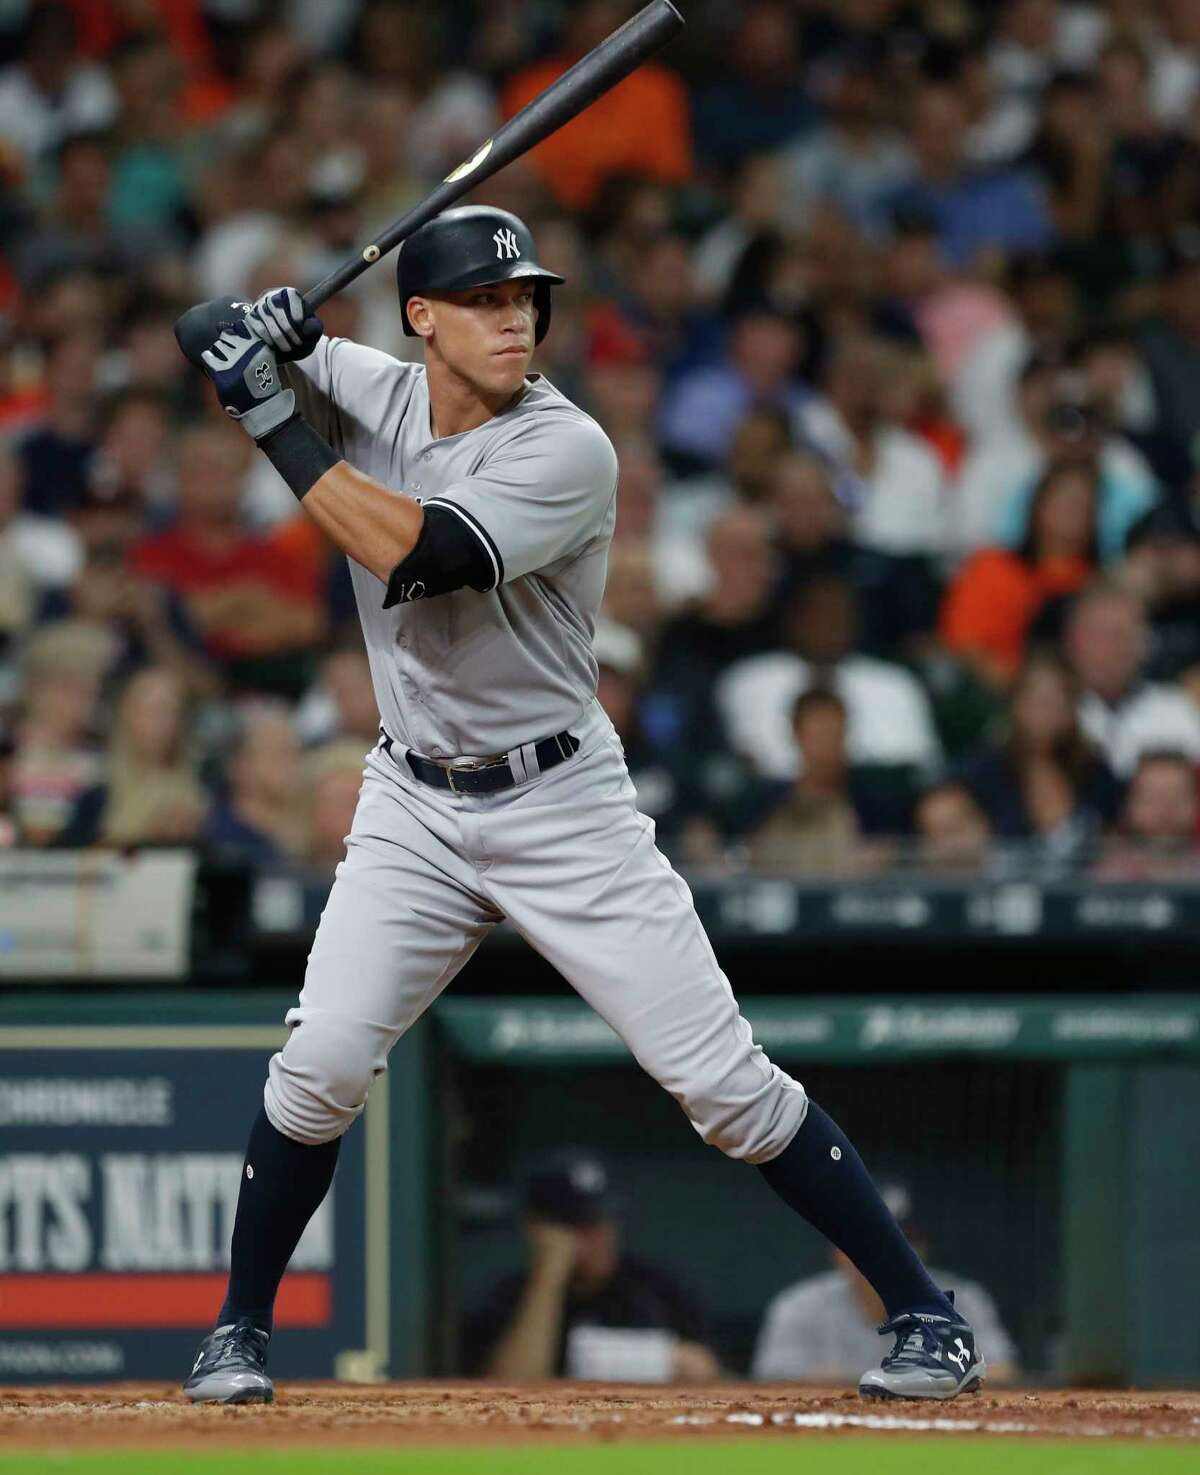 Yankees rookie outfielder Aaron Judge has superstar's stats but not the ego